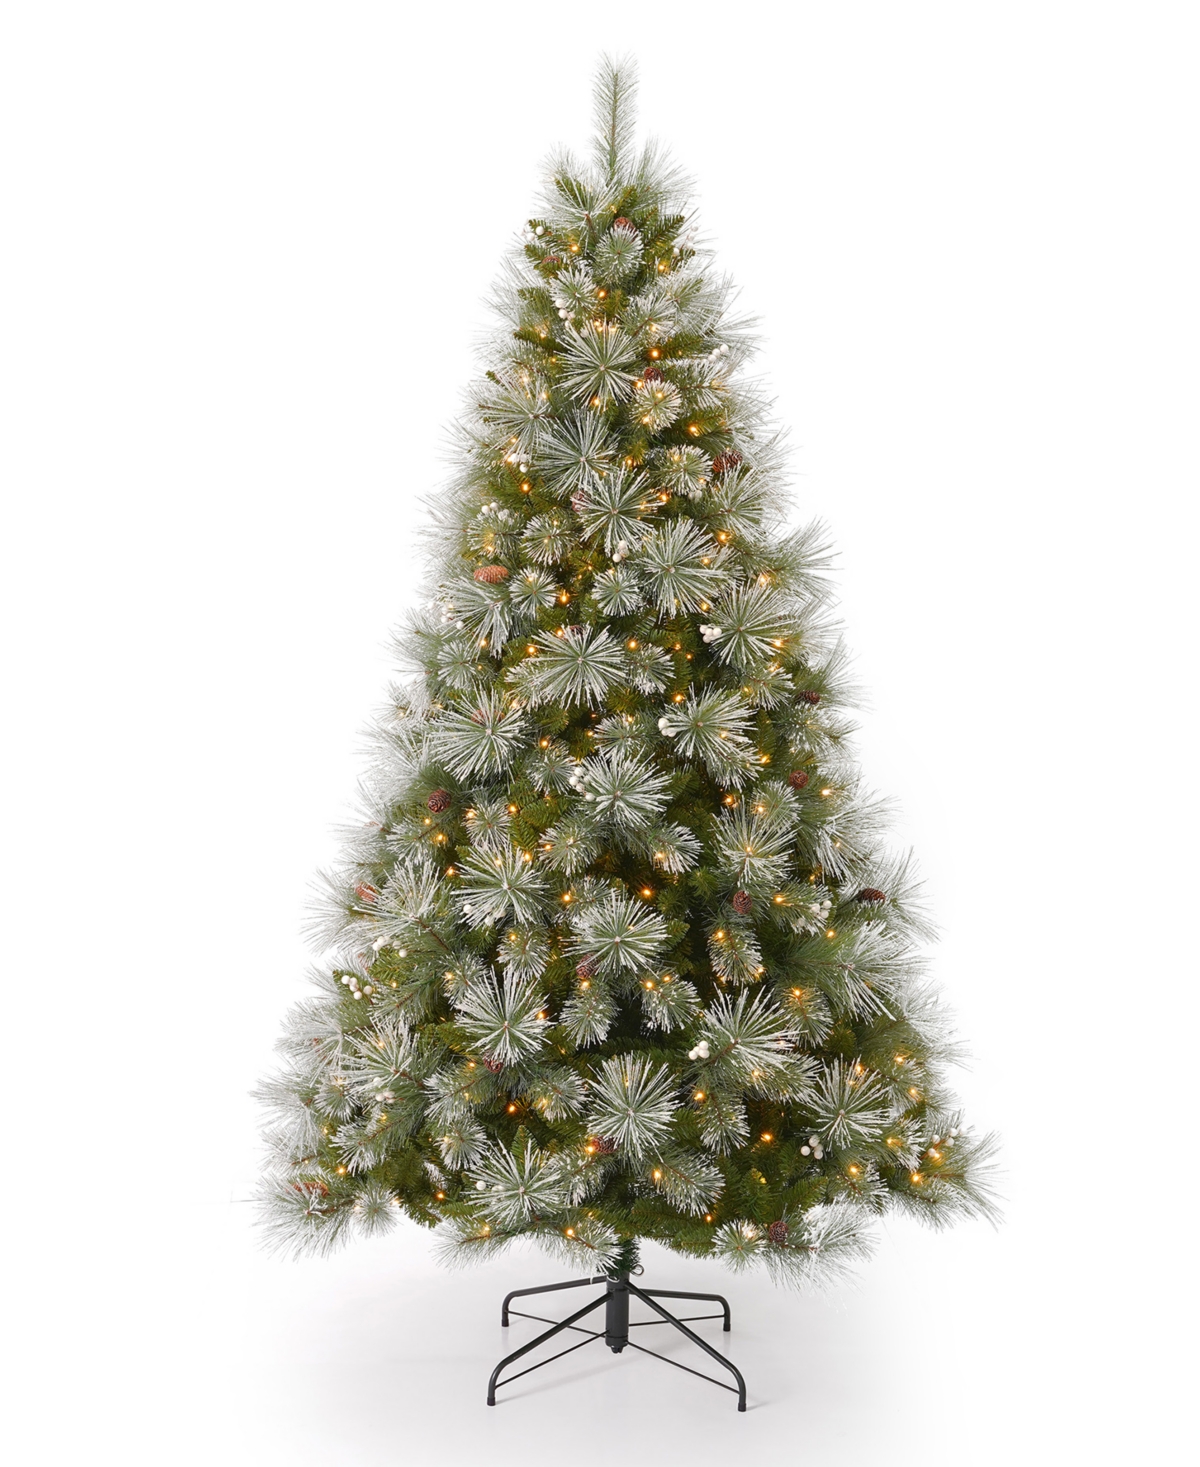 Seasonal Glistening Mountain Pine 6' Pre-lit Pine Needle Mixed Pvc Tree With Metal Stand, Pinecone, Berries, In Green